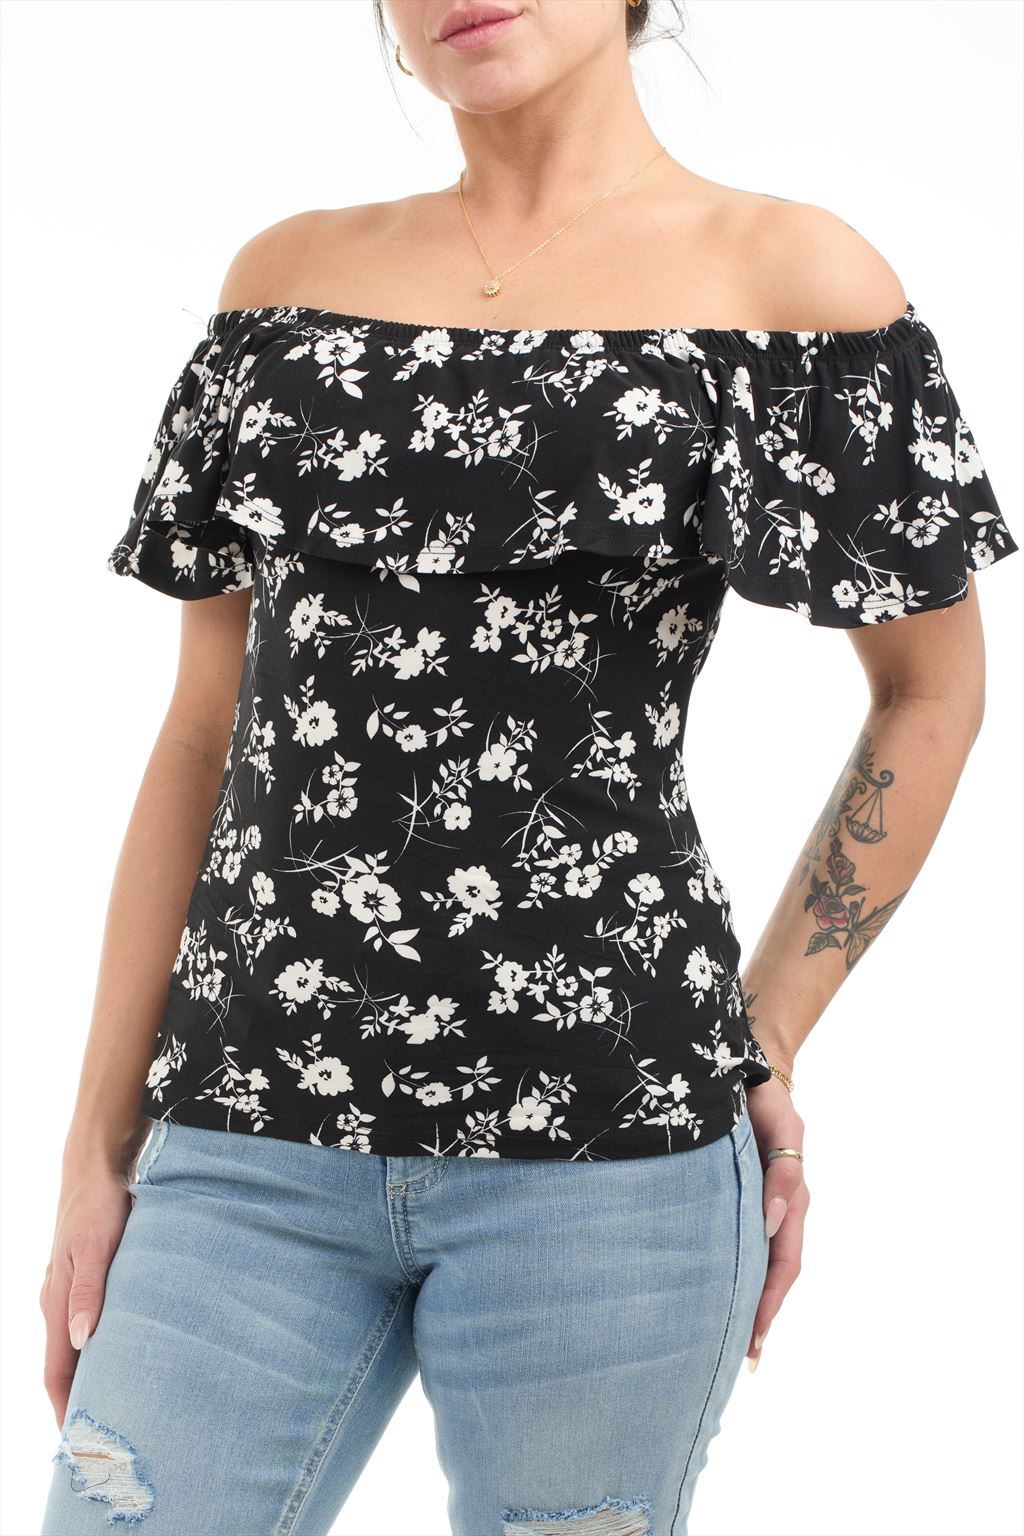 Printed top with bare shoulders